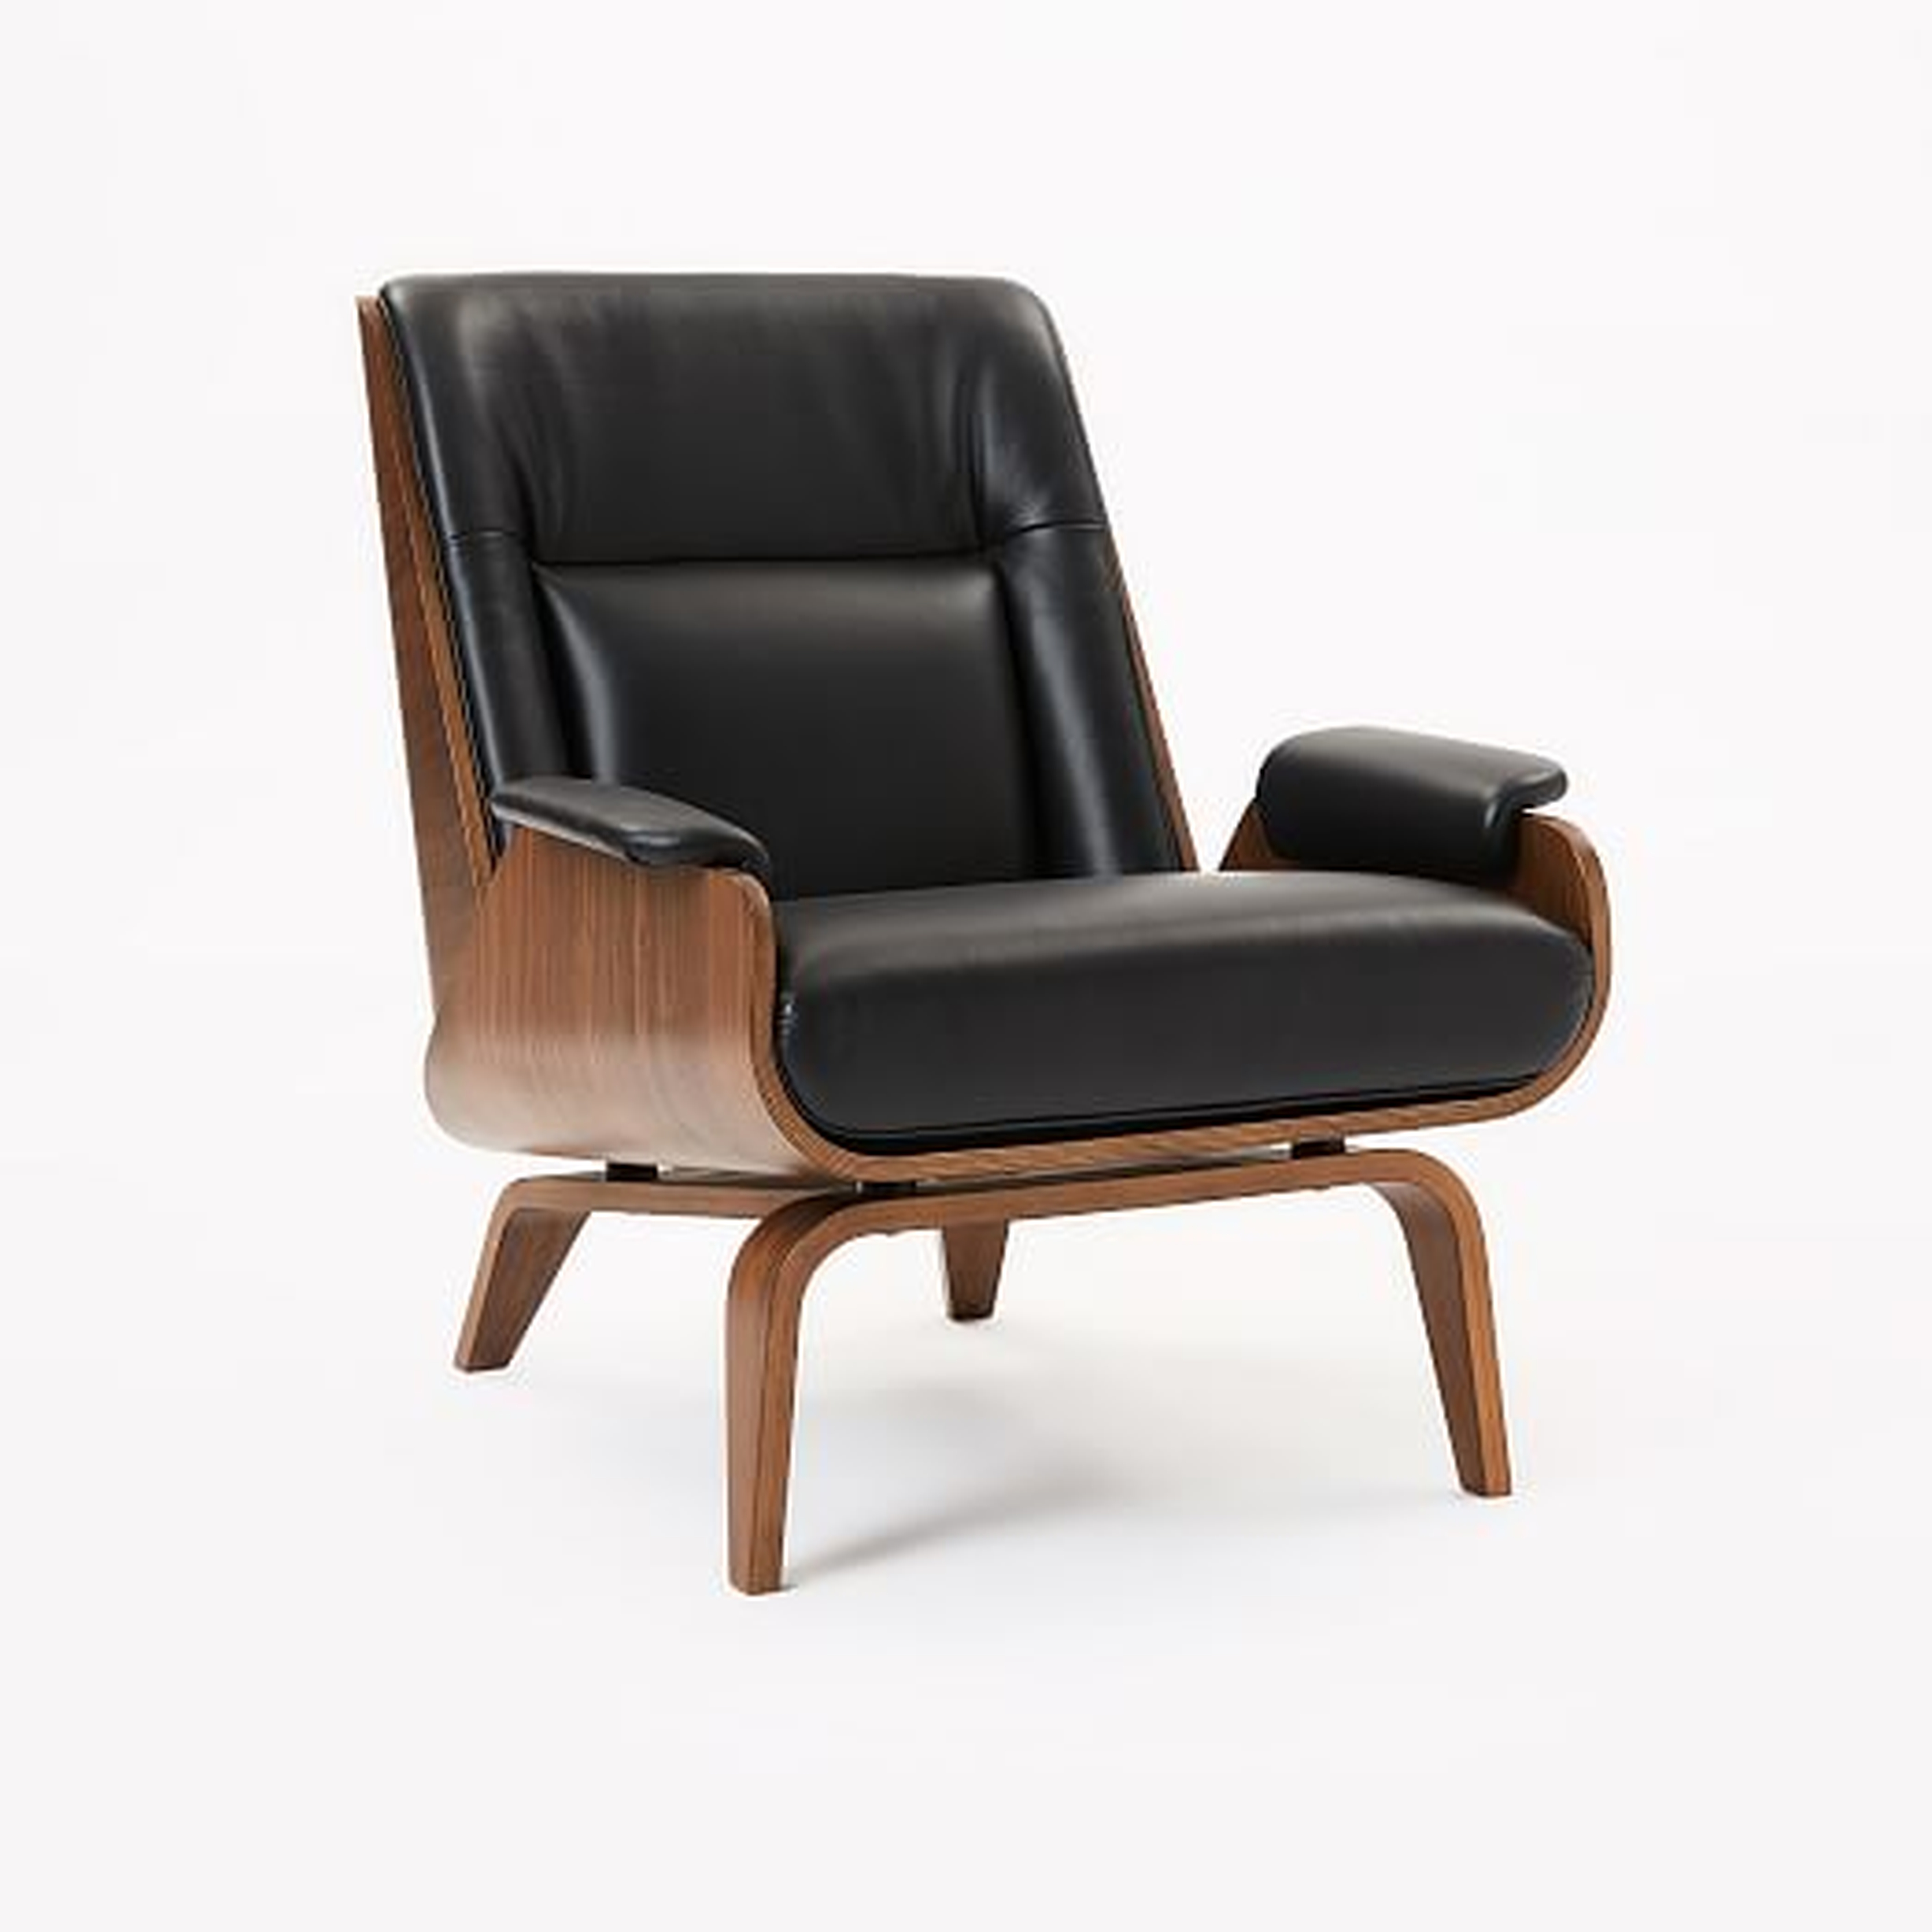 Paulo Bent Ply Leather Chair - West Elm